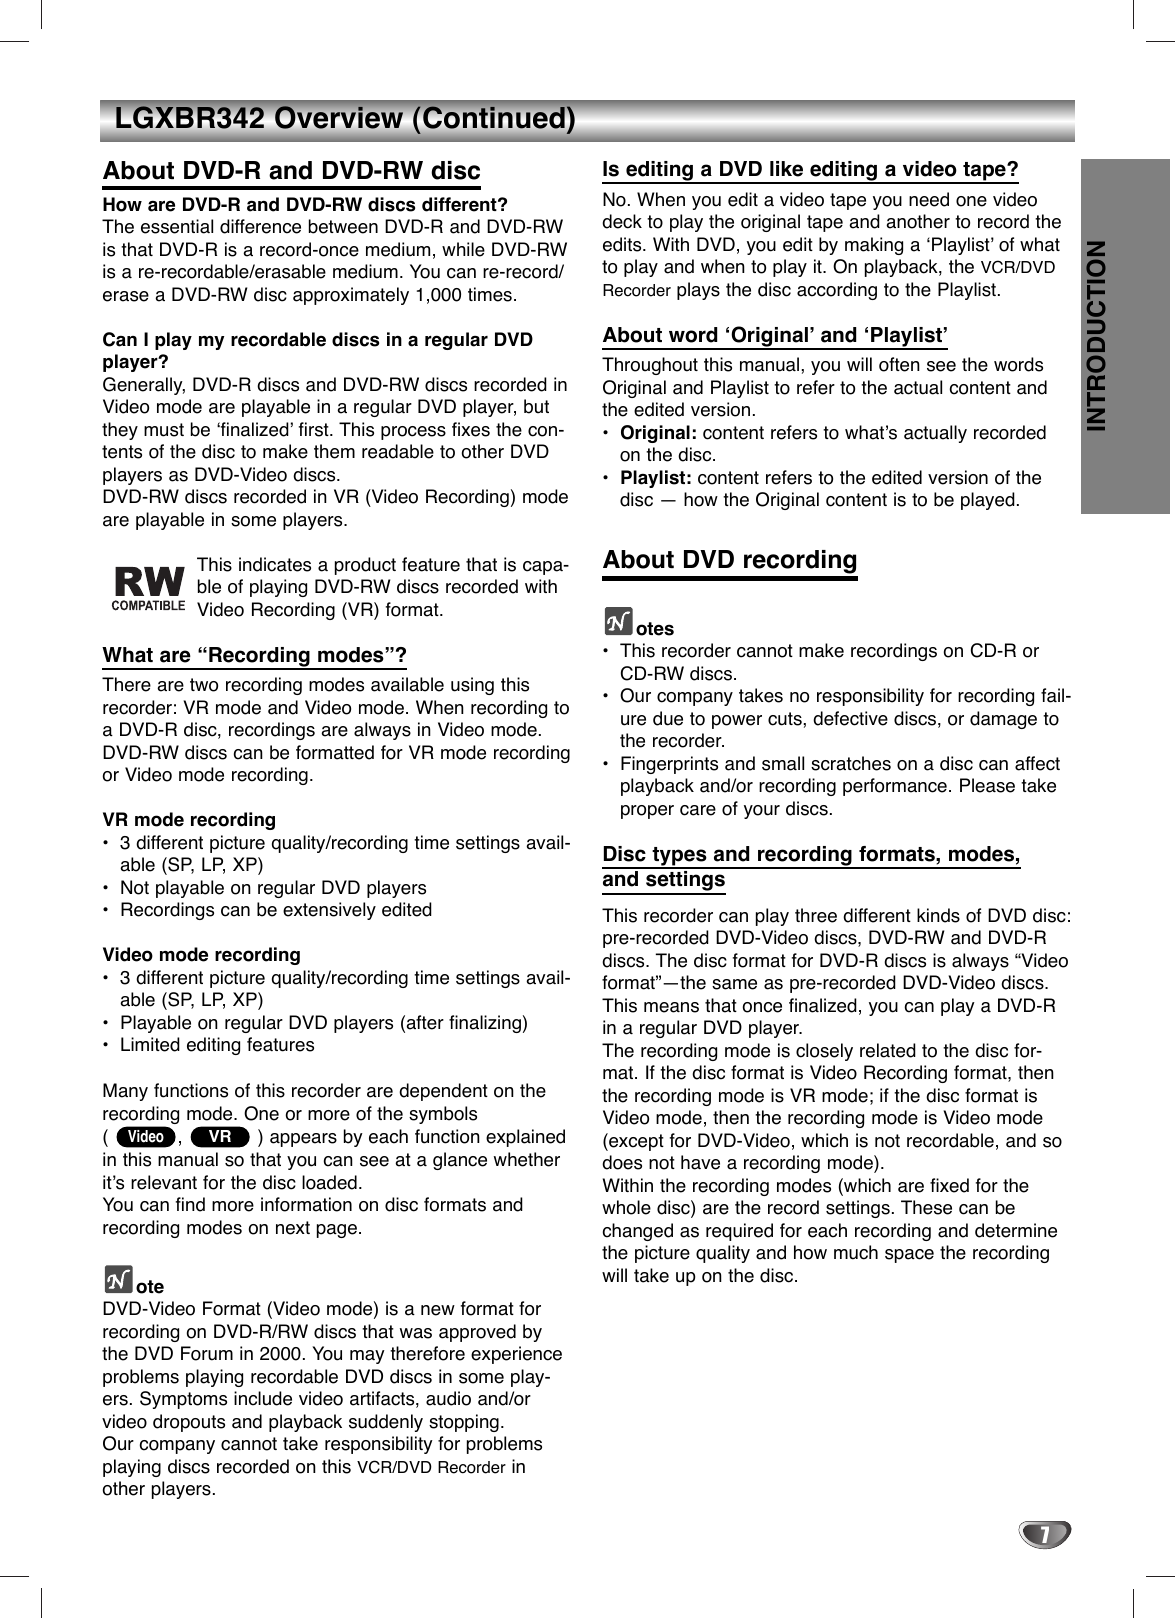 INTRODUCTION7LGXBR342 Overview (Continued)About DVD-R and DVD-RW discHow are DVD-R and DVD-RW discs different?The essential difference between DVD-R and DVD-RWis that DVD-R is a record-once medium, while DVD-RWis a re-recordable/erasable medium. You can re-record/erase a DVD-RW disc approximately 1,000 times.Can I play my recordable discs in a regular DVDplayer?Generally, DVD-R discs and DVD-RW discs recorded inVideo mode are playable in a regular DVD player, butthey must be ‘finalized’ first. This process fixes the con-tents of the disc to make them readable to other DVDplayers as DVD-Video discs.DVD-RW discs recorded in VR (Video Recording) modeare playable in some players.This indicates a product feature that is capa-ble of playing DVD-RW discs recorded withVideo Recording (VR) format.What are “Recording modes”?There are two recording modes available using thisrecorder: VR mode and Video mode. When recording toa DVD-R disc, recordings are always in Video mode.DVD-RW discs can be formatted for VR mode recordingor Video mode recording.VR mode recording•3 different picture quality/recording time settings avail-able (SP, LP, XP)•Not playable on regular DVD players•Recordings can be extensively editedVideo mode recording•3 different picture quality/recording time settings avail-able (SP, LP, XP)•Playable on regular DVD players (after finalizing)•Limited editing featuresMany functions of this recorder are dependent on therecording mode. One or more of the symbols (  , ) appears by each function explainedin this manual so that you can see at a glance whetherit’s relevant for the disc loaded.You can find more information on disc formats andrecording modes on next page.oteDVD-Video Format (Video mode) is a new format forrecording on DVD-R/RW discs that was approved bythe DVD Forum in 2000. You may therefore experienceproblems playing recordable DVD discs in some play-ers. Symptoms include video artifacts, audio and/orvideo dropouts and playback suddenly stopping.Our company cannot take responsibility for problemsplaying discs recorded on this VCR/DVD Recorder inother players.Is editing a DVD like editing a video tape?No. When you edit a video tape you need one videodeck to play the original tape and another to record theedits. With DVD, you edit by making a ‘Playlist’ of whatto play and when to play it. On playback, the VCR/DVDRecorder plays the disc according to the Playlist.About word ‘Original’ and ‘Playlist’Throughout this manual, you will often see the wordsOriginal and Playlist to refer to the actual content andthe edited version.•Original: content refers to what’s actually recordedon the disc.•Playlist: content refers to the edited version of thedisc — how the Original content is to be played.About DVD recordingotes•This recorder cannot make recordings on CD-R orCD-RW discs.•Our company takes no responsibility for recording fail-ure due to power cuts, defective discs, or damage tothe recorder.•Fingerprints and small scratches on a disc can affectplayback and/or recording performance. Please takeproper care of your discs.Disc types and recording formats, modes, and settingsThis recorder can play three different kinds of DVD disc:pre-recorded DVD-Video discs, DVD-RW and DVD-Rdiscs. The disc format for DVD-R discs is always “Videoformat”—the same as pre-recorded DVD-Video discs.This means that once finalized, you can play a DVD-Rin a regular DVD player.The recording mode is closely related to the disc for-mat. If the disc format is Video Recording format, thenthe recording mode is VR mode; if the disc format isVideo mode, then the recording mode is Video mode(except for DVD-Video, which is not recordable, and sodoes not have a recording mode).Within the recording modes (which are fixed for thewhole disc) are the record settings. These can bechanged as required for each recording and determinethe picture quality and how much space the recordingwill take up on the disc.VRVideo